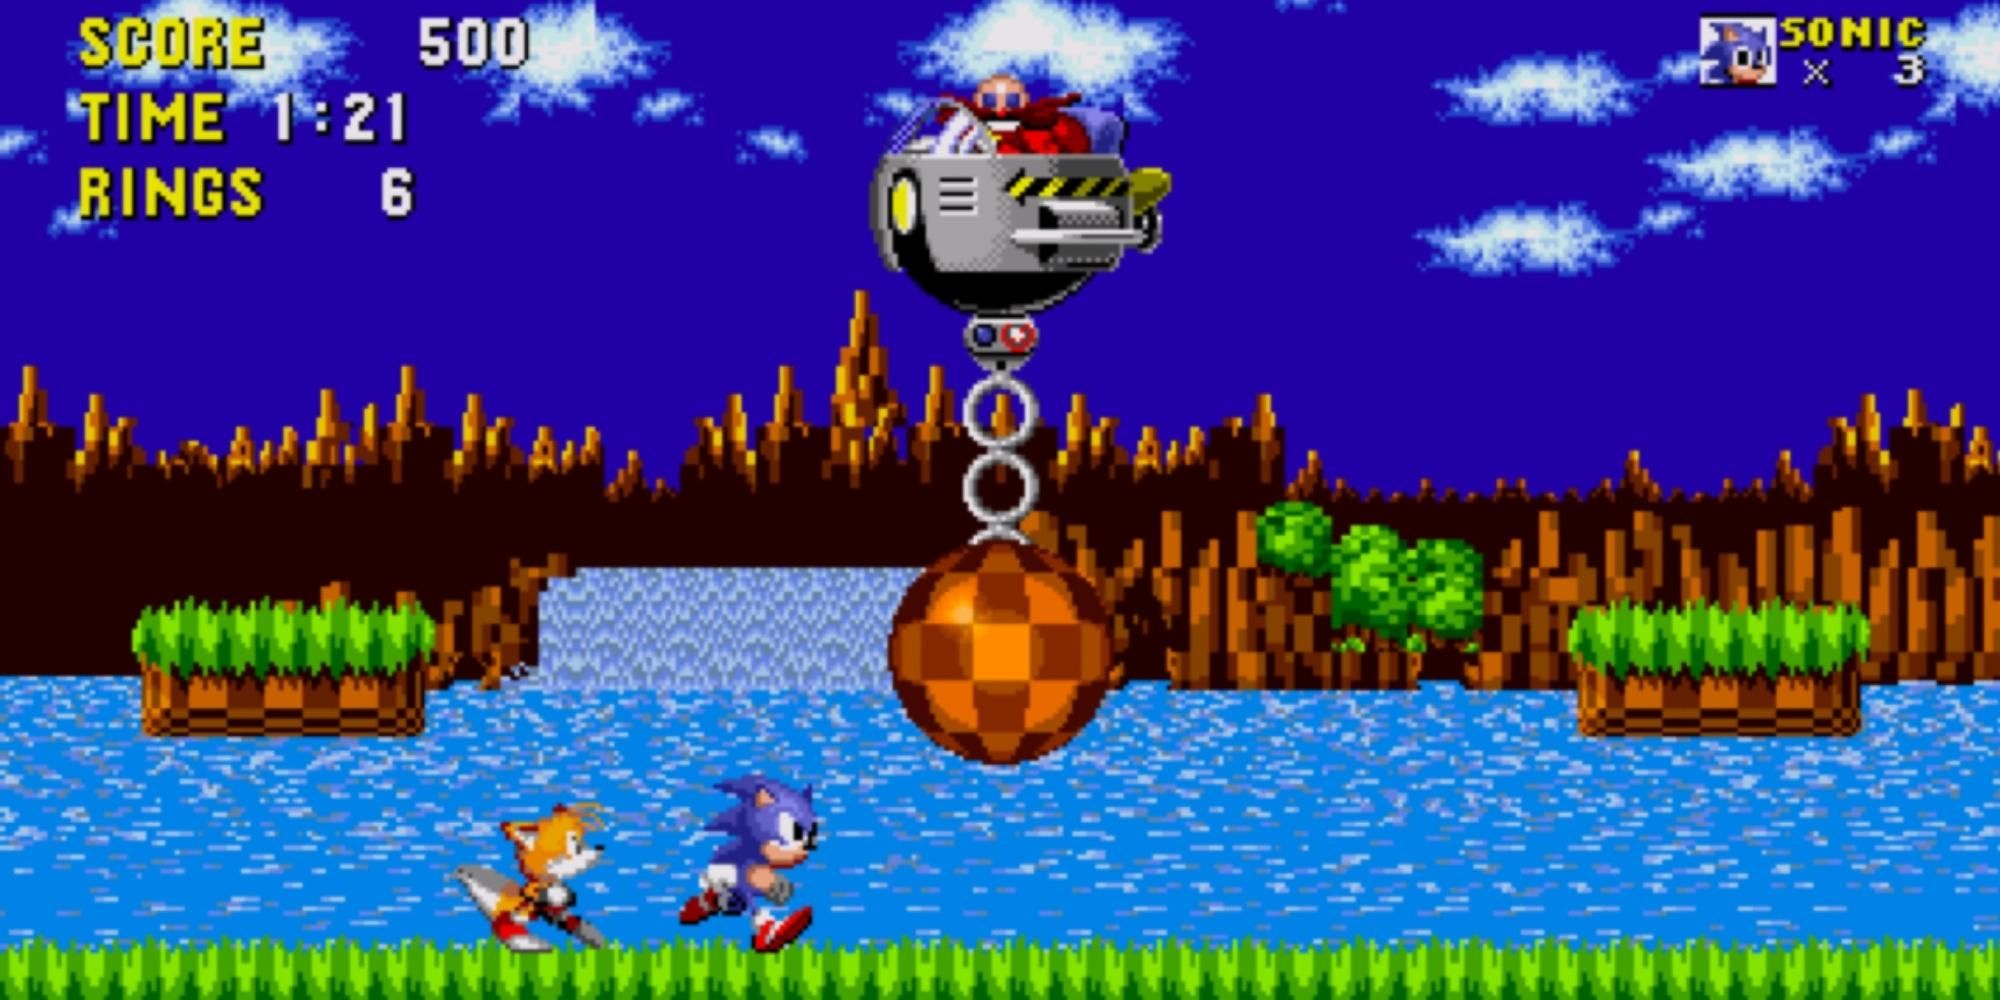 Sonic and tails running in Sonic the Hedgehog video game